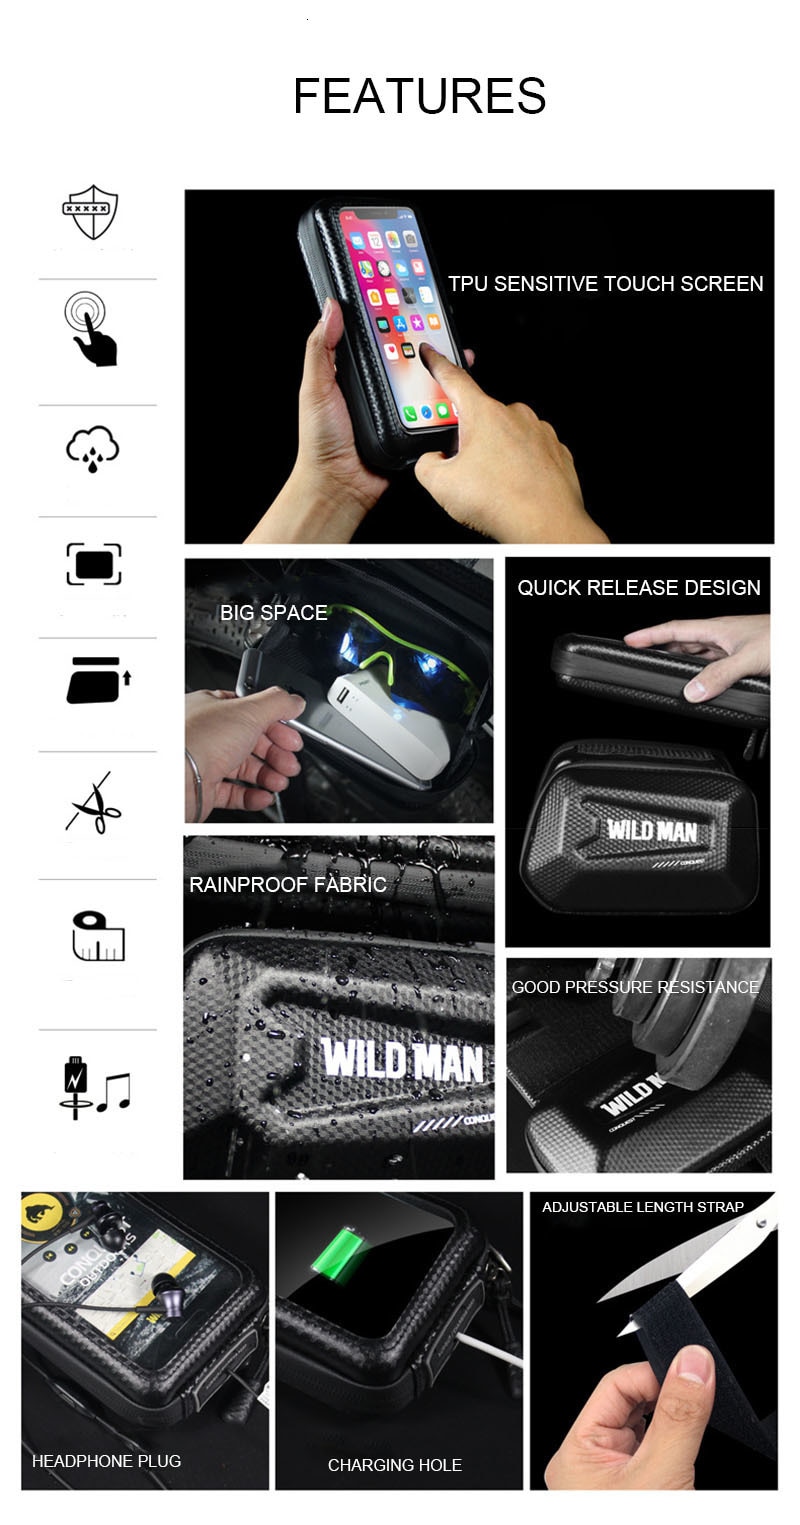 WILD MAN Rainproof Bicycle Bag Hard Shell Front Top Tube Cycling Bag 6.5 Inch Phone Case Touch Screen Bike Bag Accessories